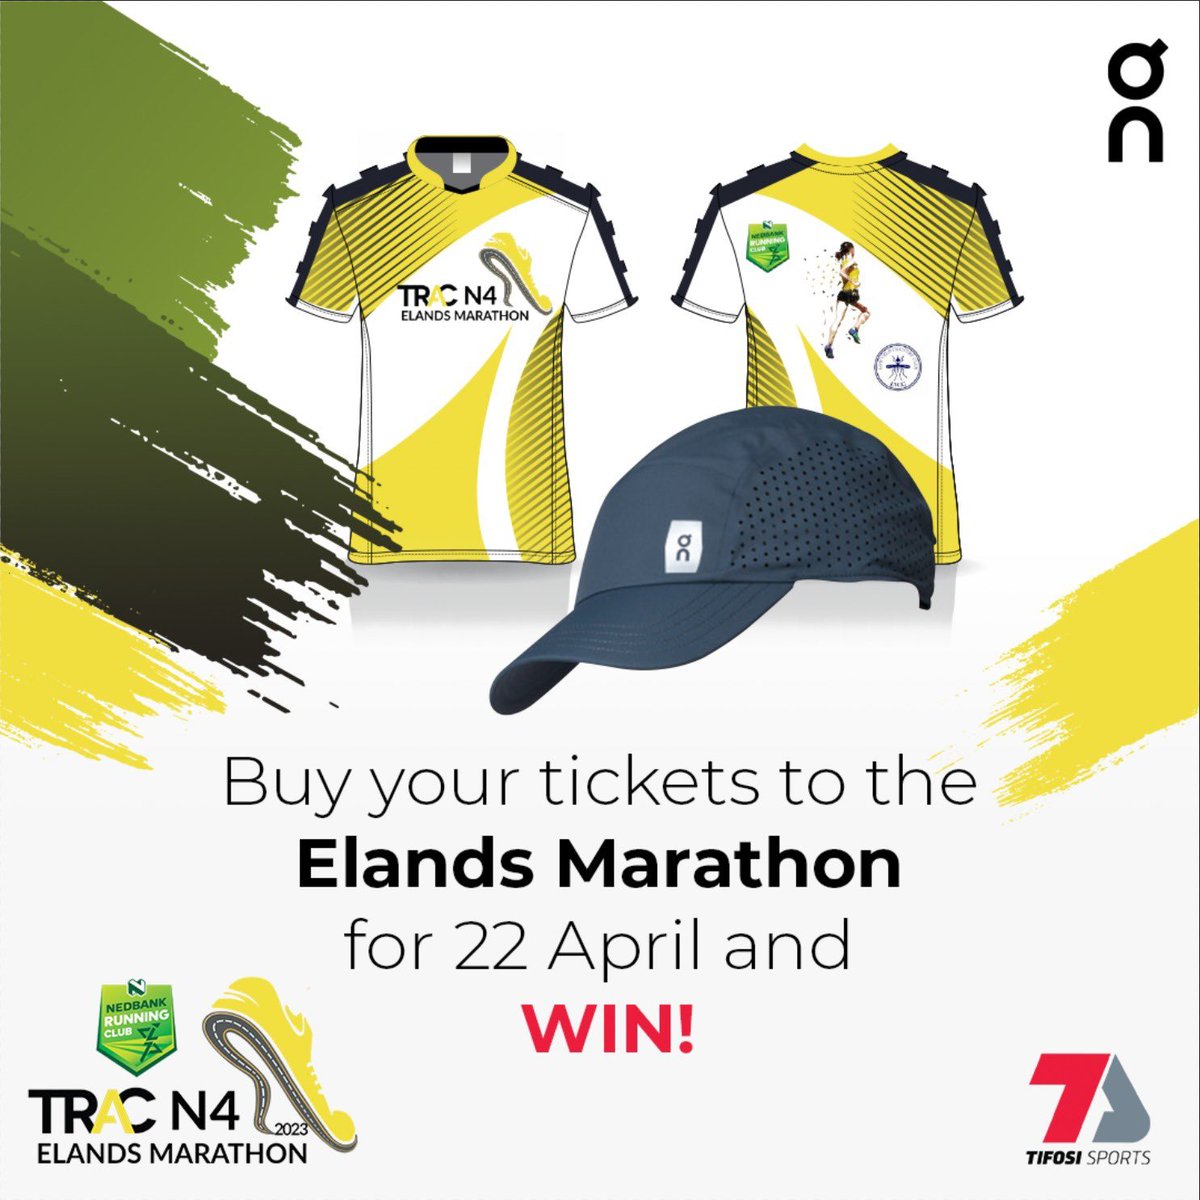 Complete your entry for Elands Marathon before 7 March and stand a chance to win one of 6 hampers.  When you enter, you can chose to buy  the race shirt, should you win, you get a 2nd shirt or a refund. @Nedbank_RC @TifosiSports #OnRunningSA #AlwaysOn #RunOnClouds #ForgetGravity